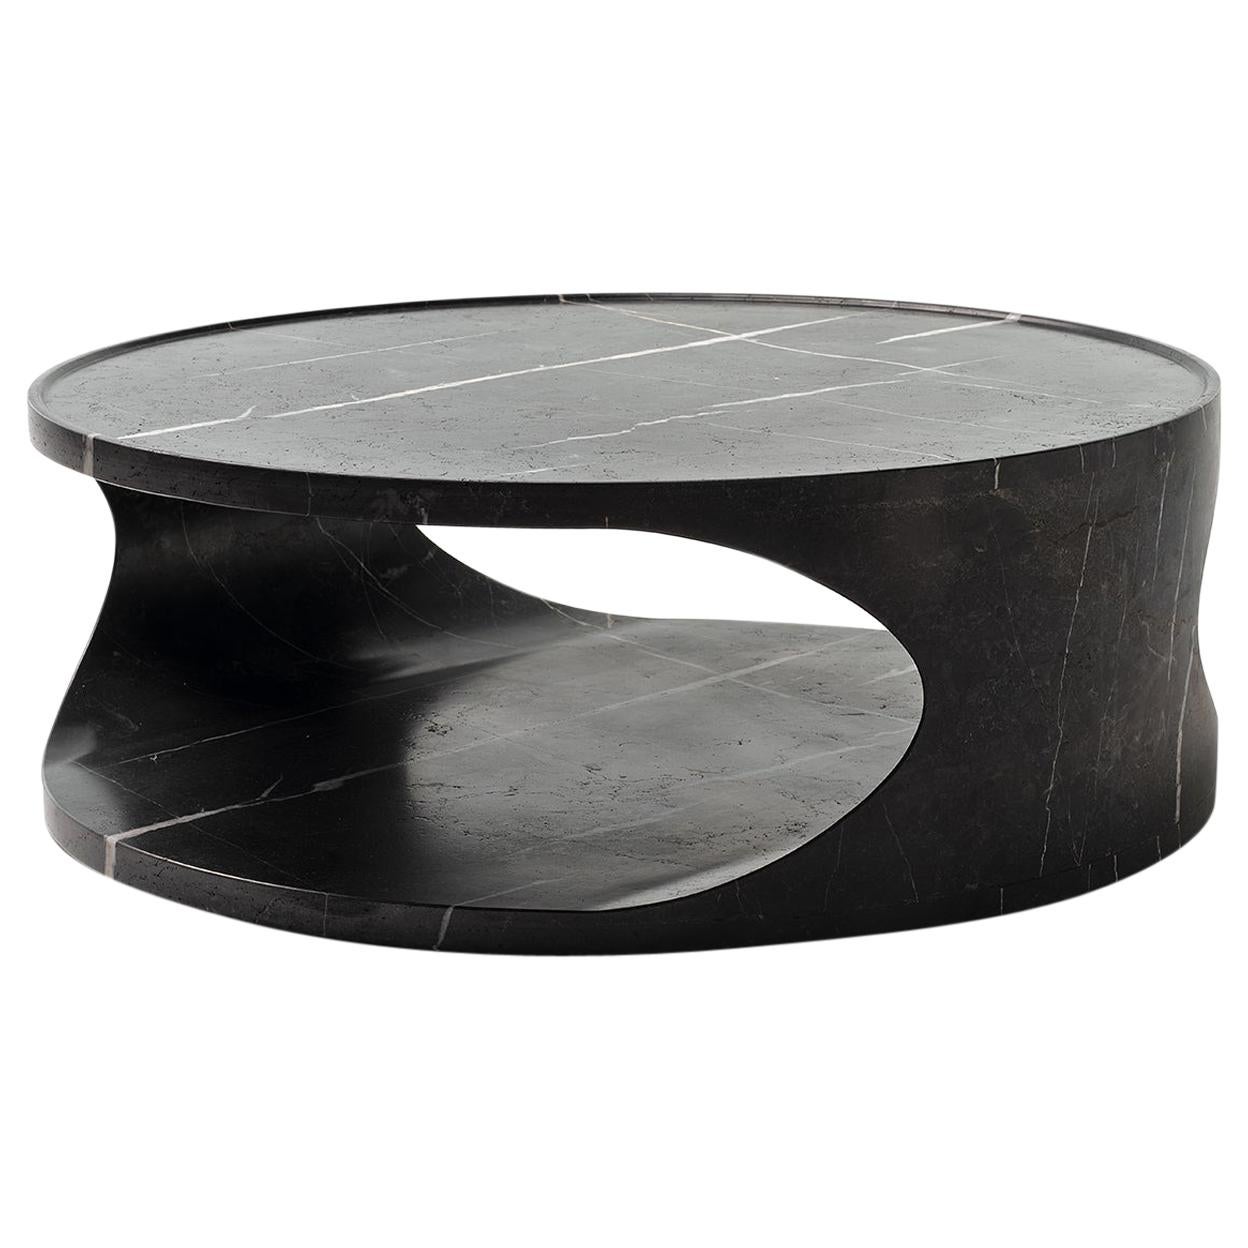 21st Century Modern Sculptural Carrara Marble Coffee Table Carved From Block For Sale